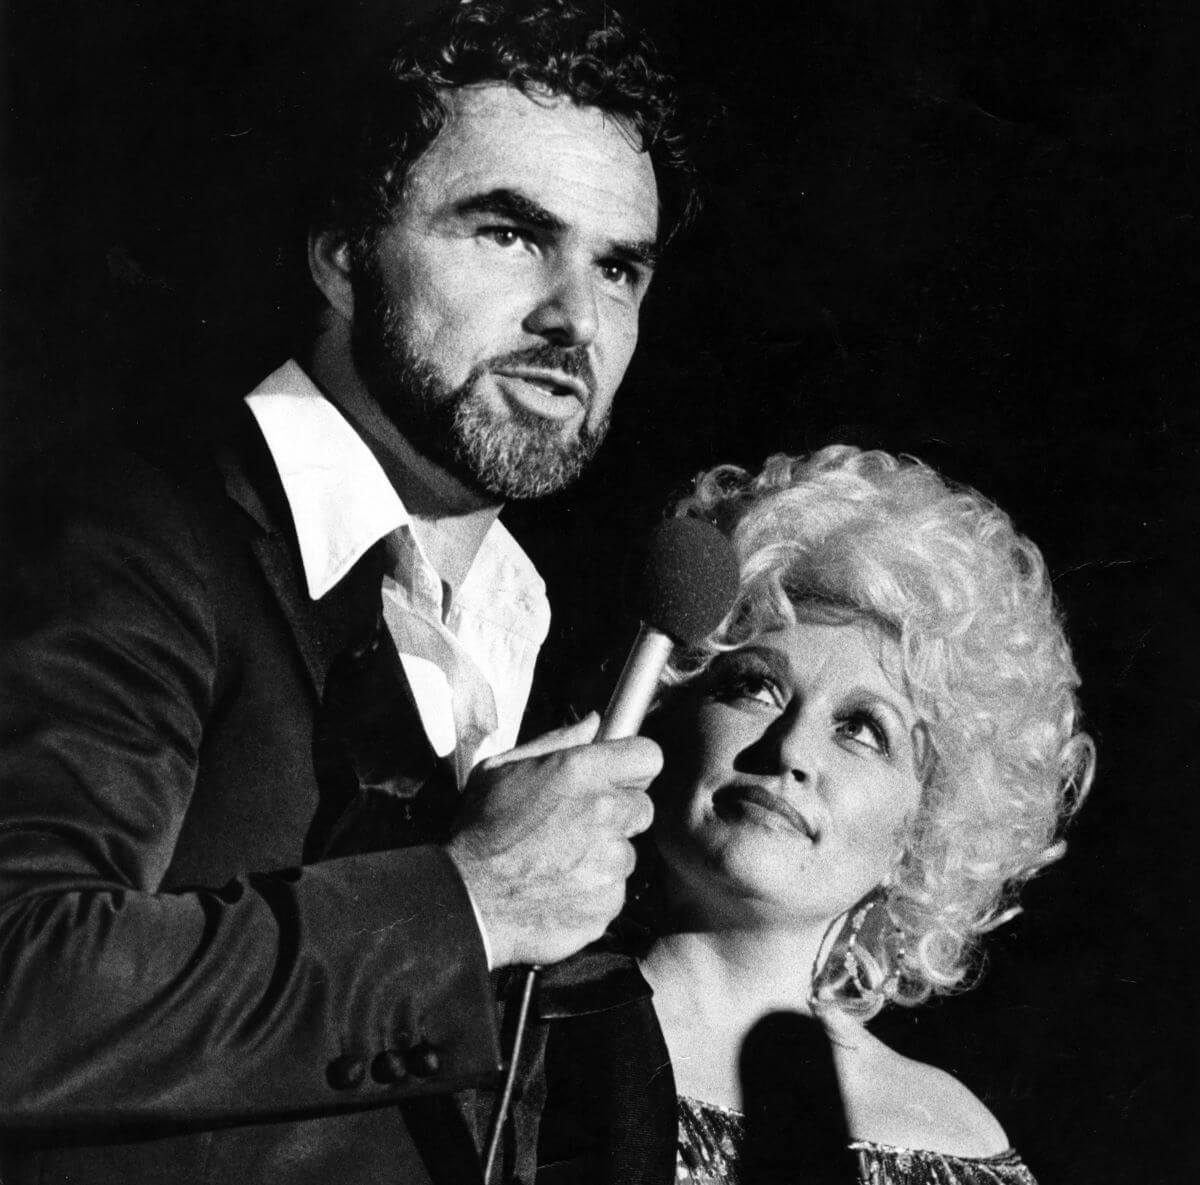 A black and white picture of Burt Reynolds holding a microphone while Dolly Parton looks up at him.